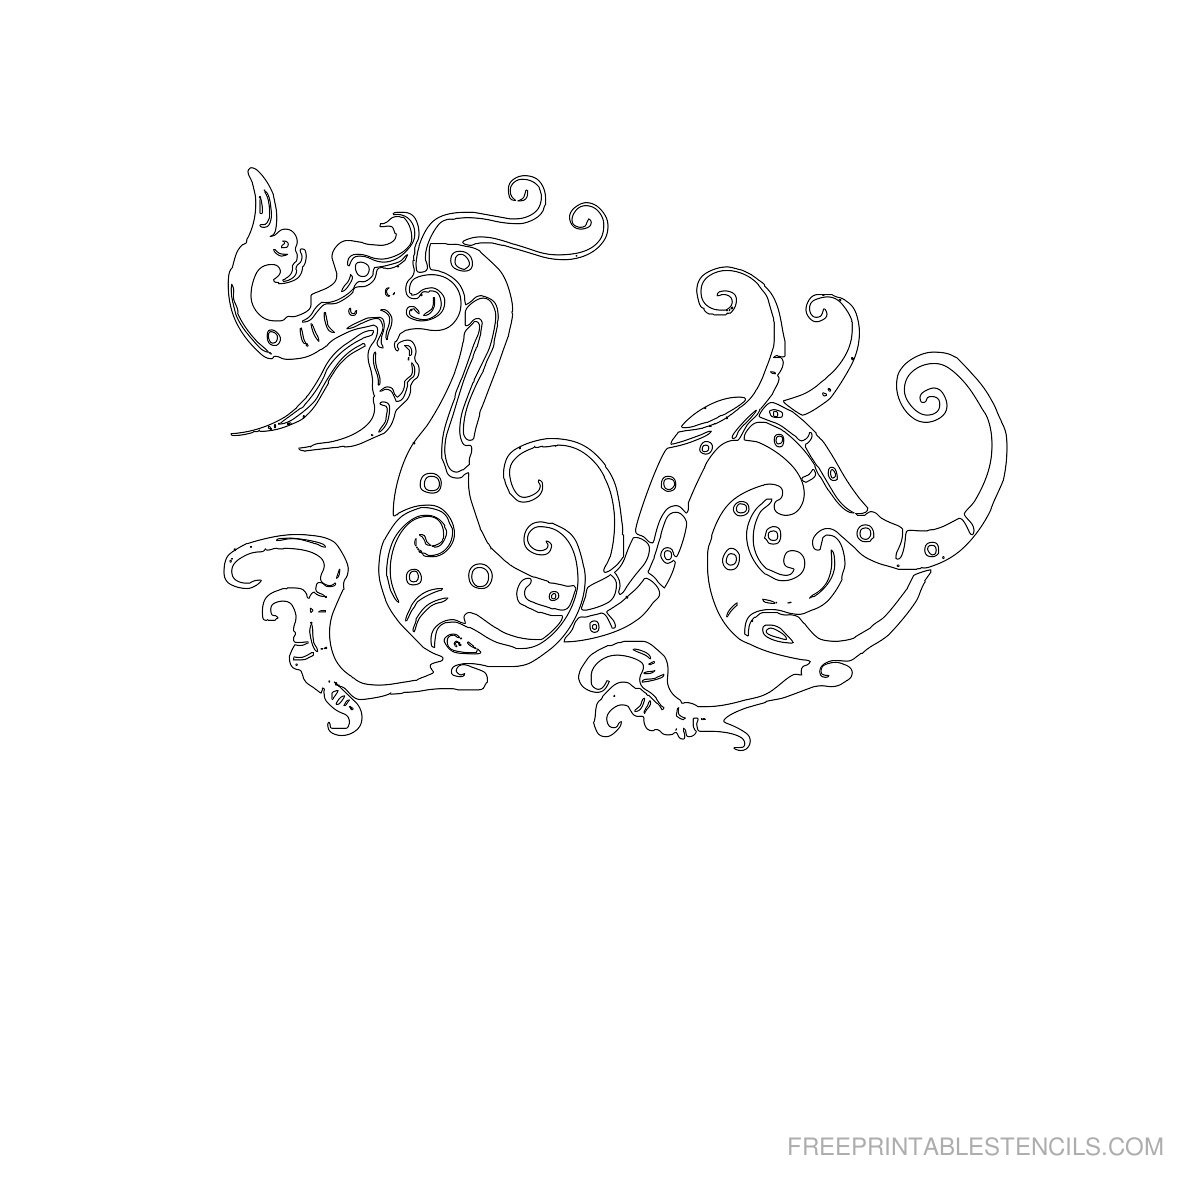 Dragon Stencils Printable Pictures | Free Printable Stencils - Free Printable Dragon Stencils